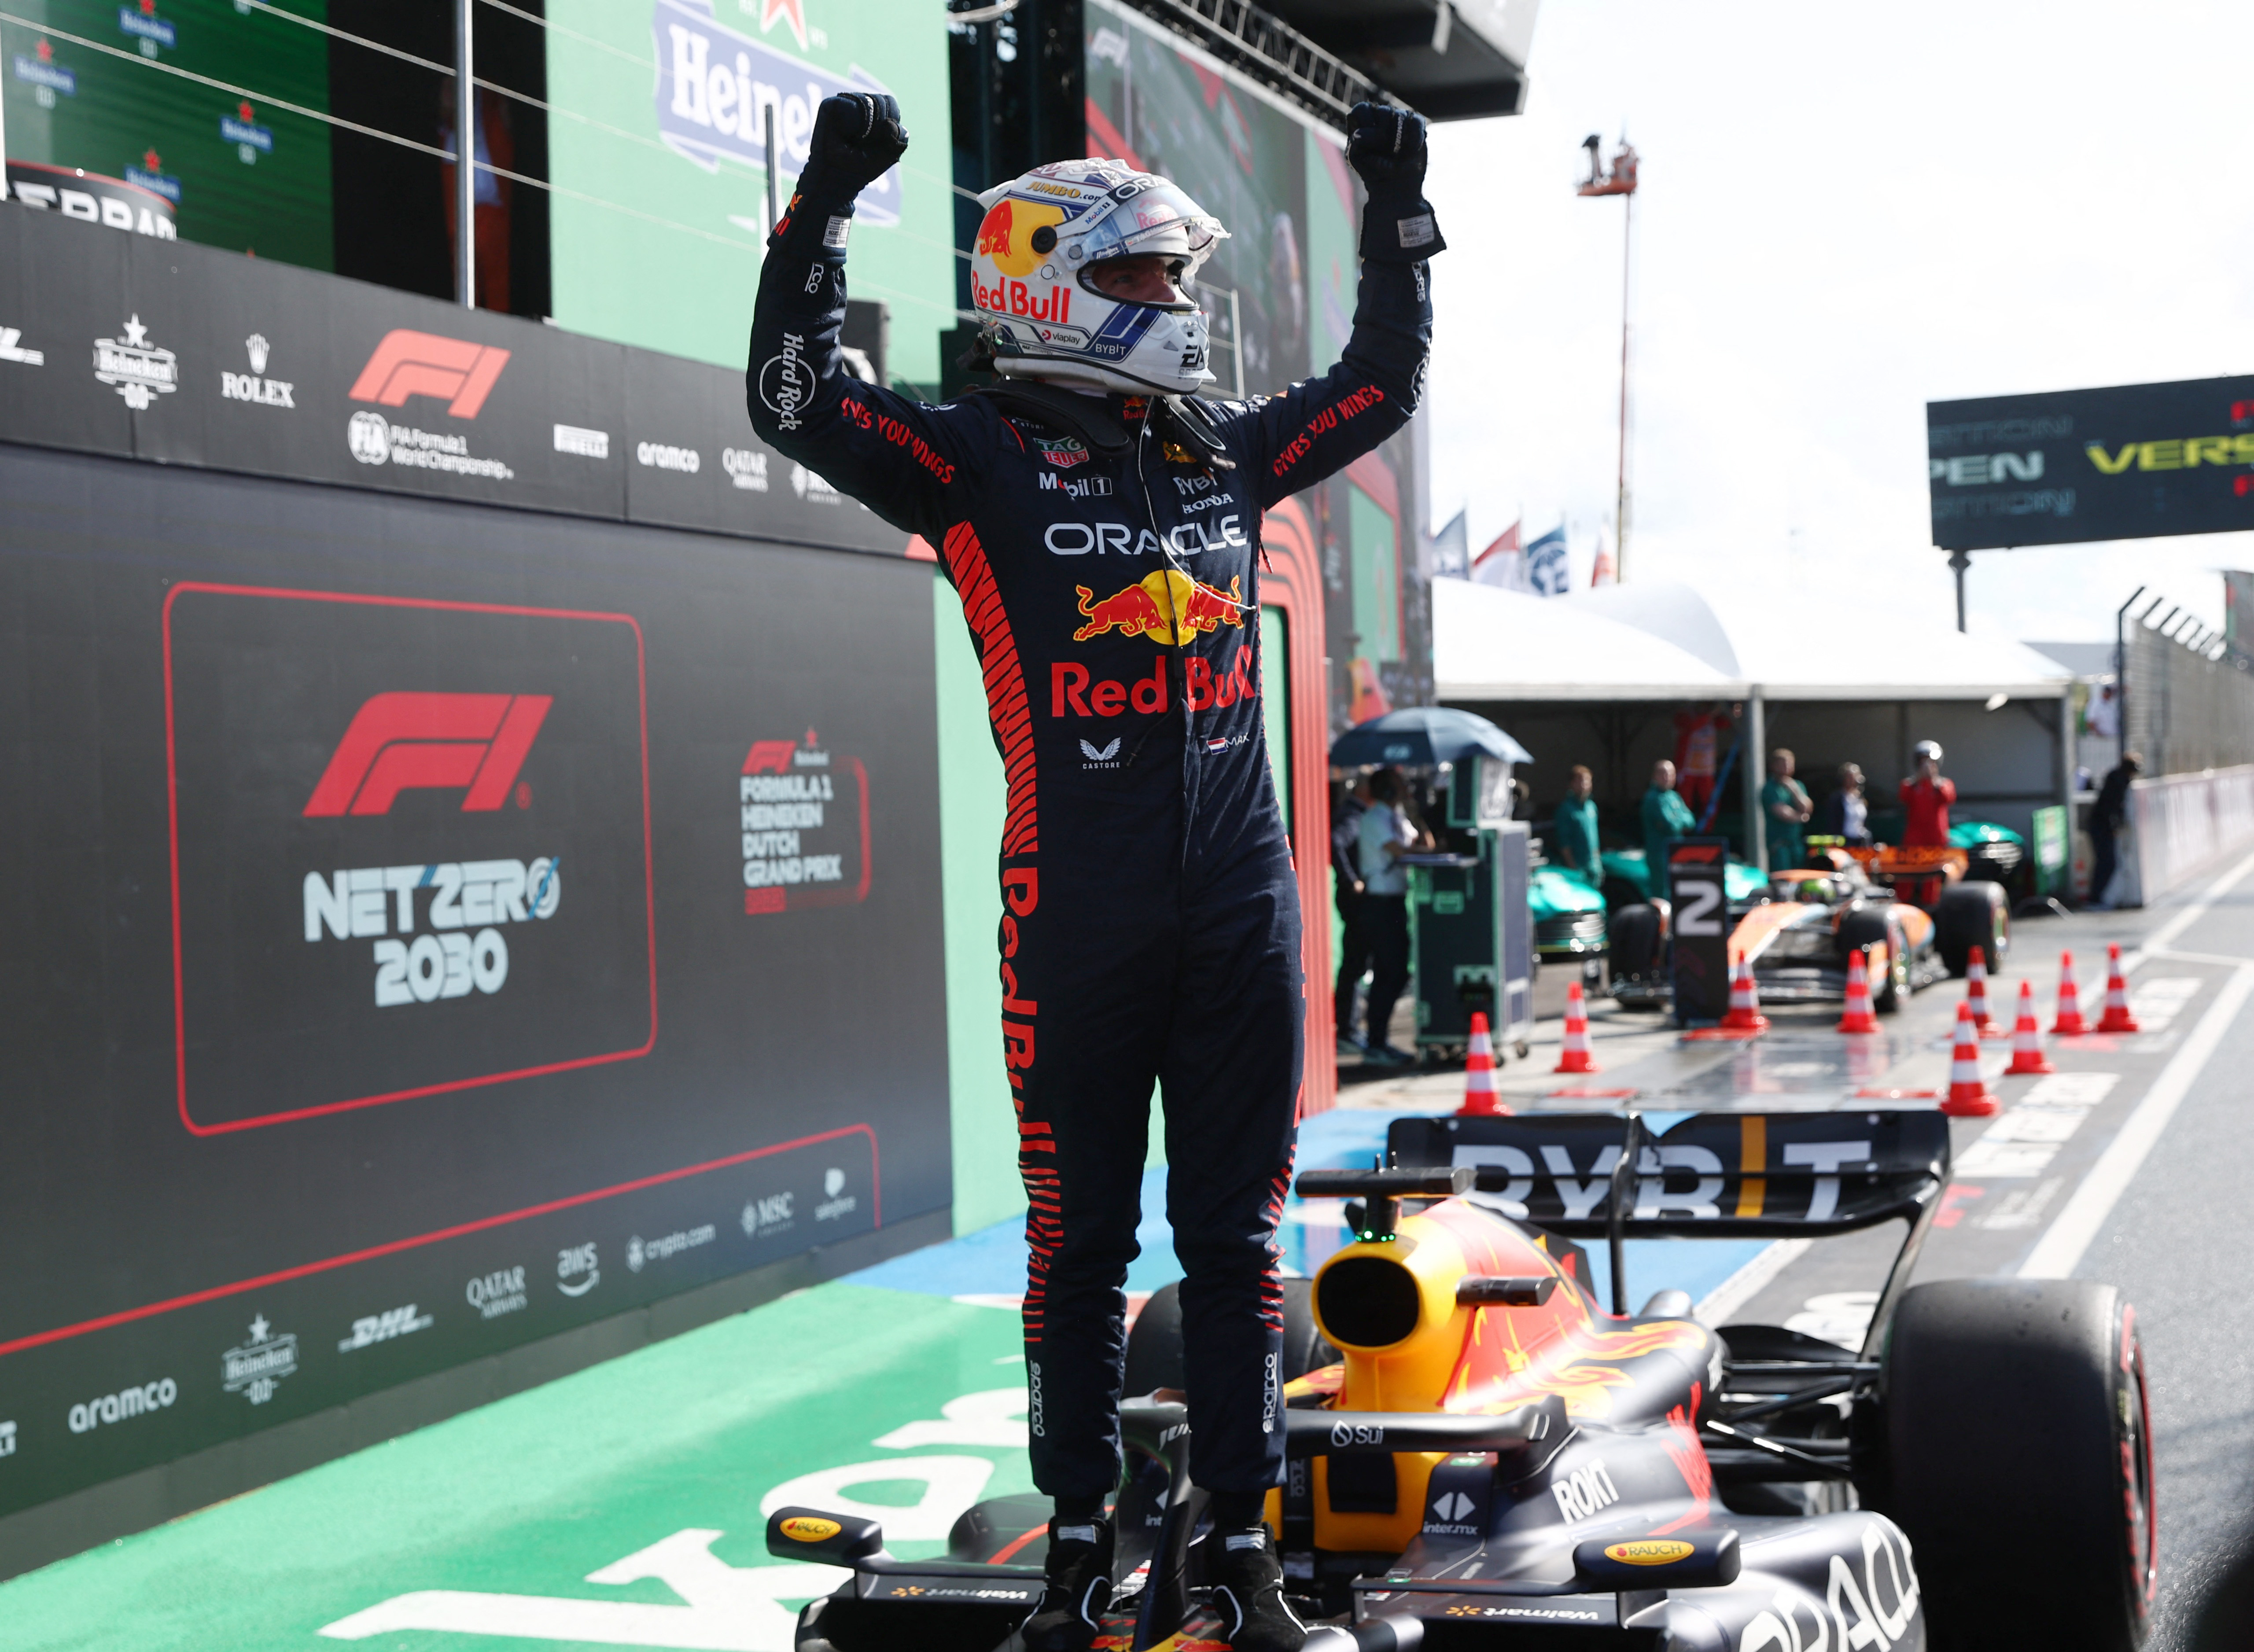 Max Verstappen wins third consecutive F1 World Championship with six races  to spare, F1, Sport